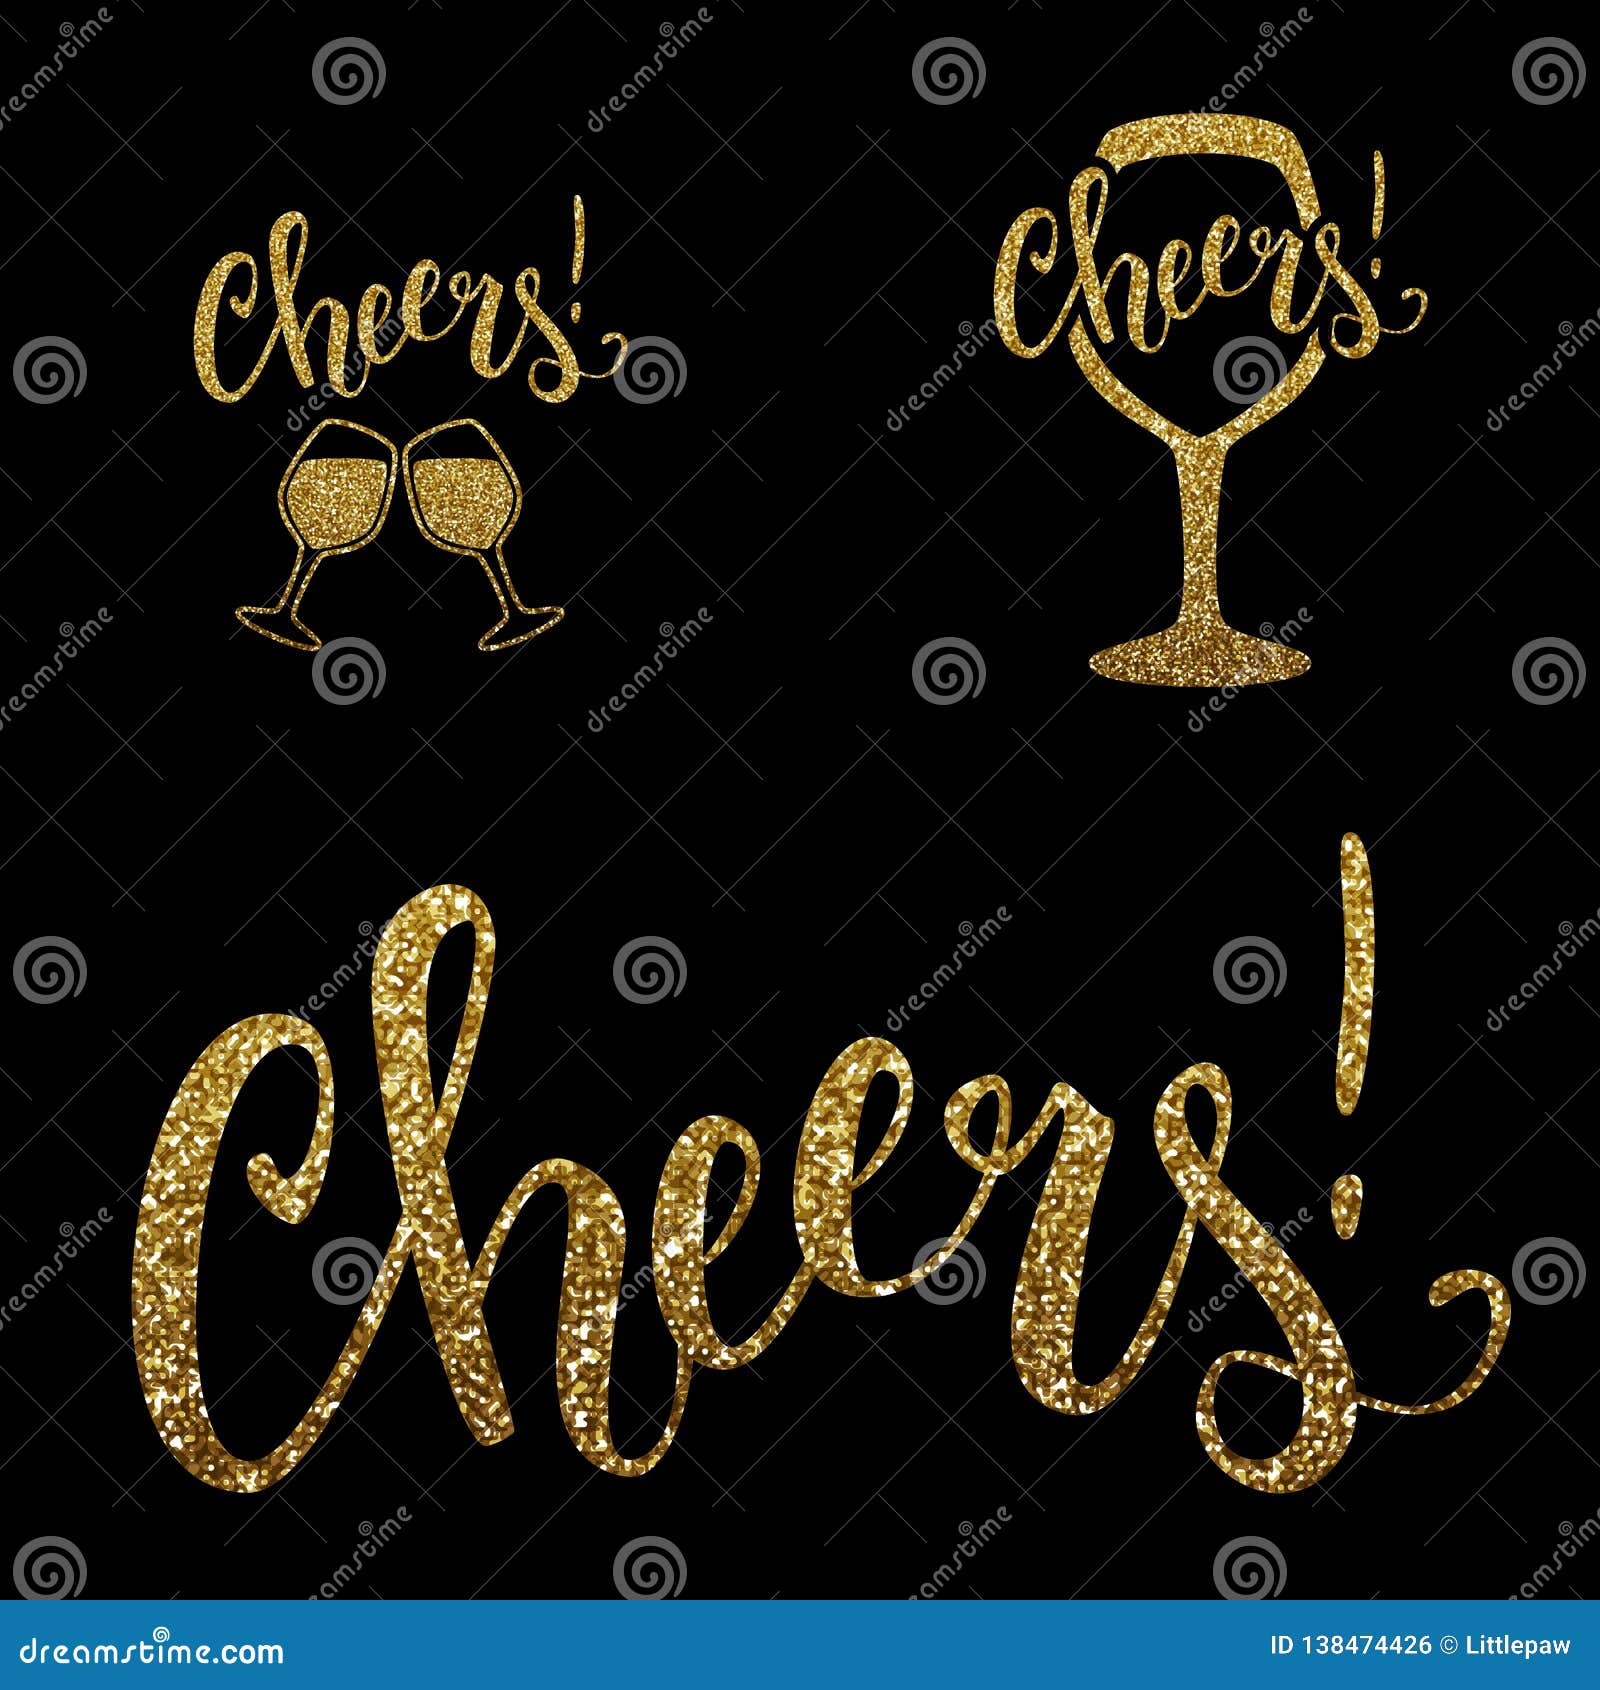 Happiness Quote Motivation Cheer Queen With Crown Wine Glass Success Encouragement Graphic Art 12oz Wine Glass